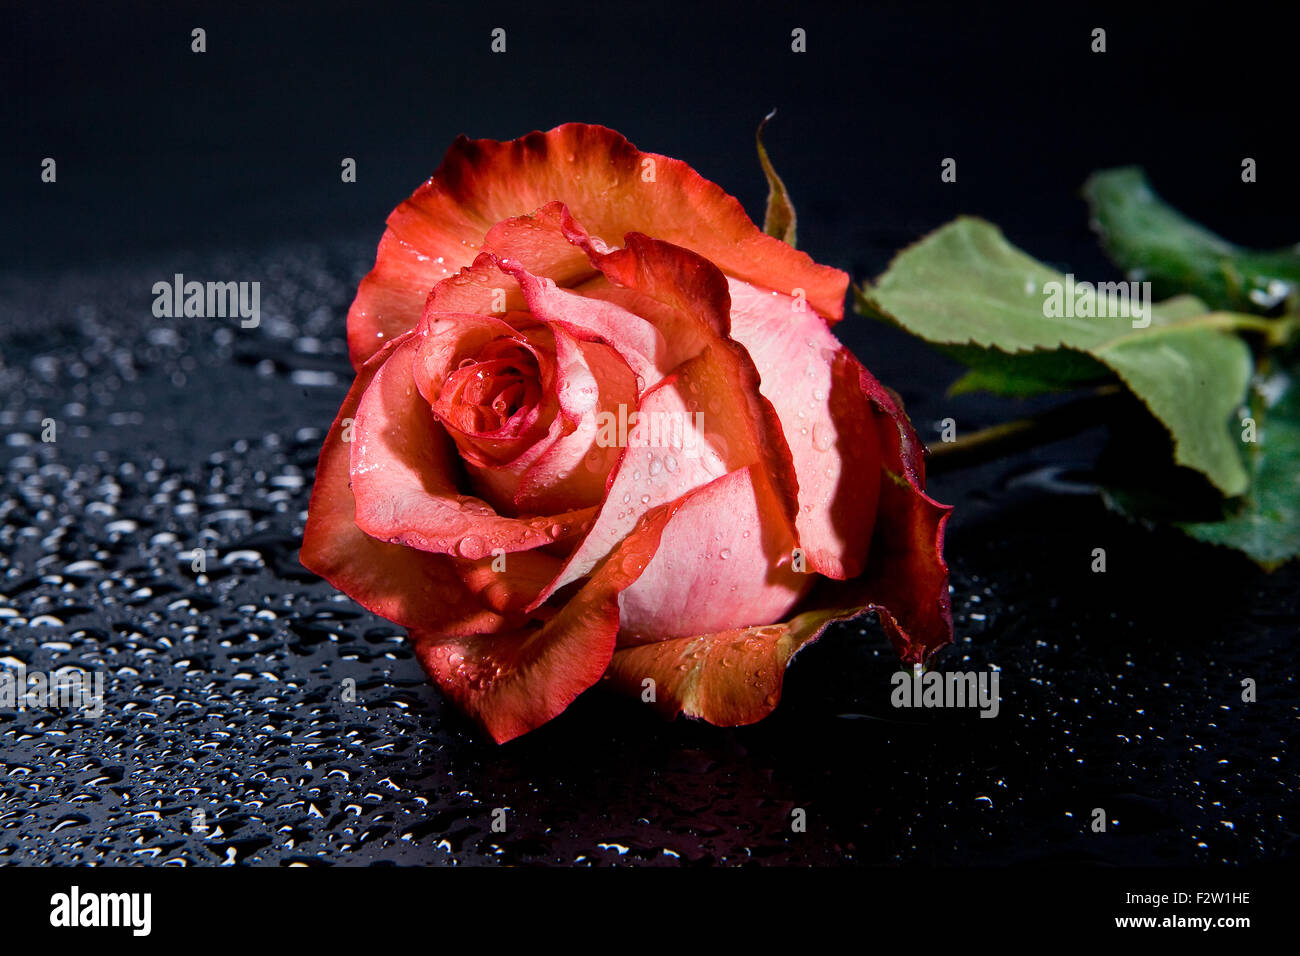 rose nature pink waterdrop petal red flower bouquet composition plant flora freshness water background Stock Photo